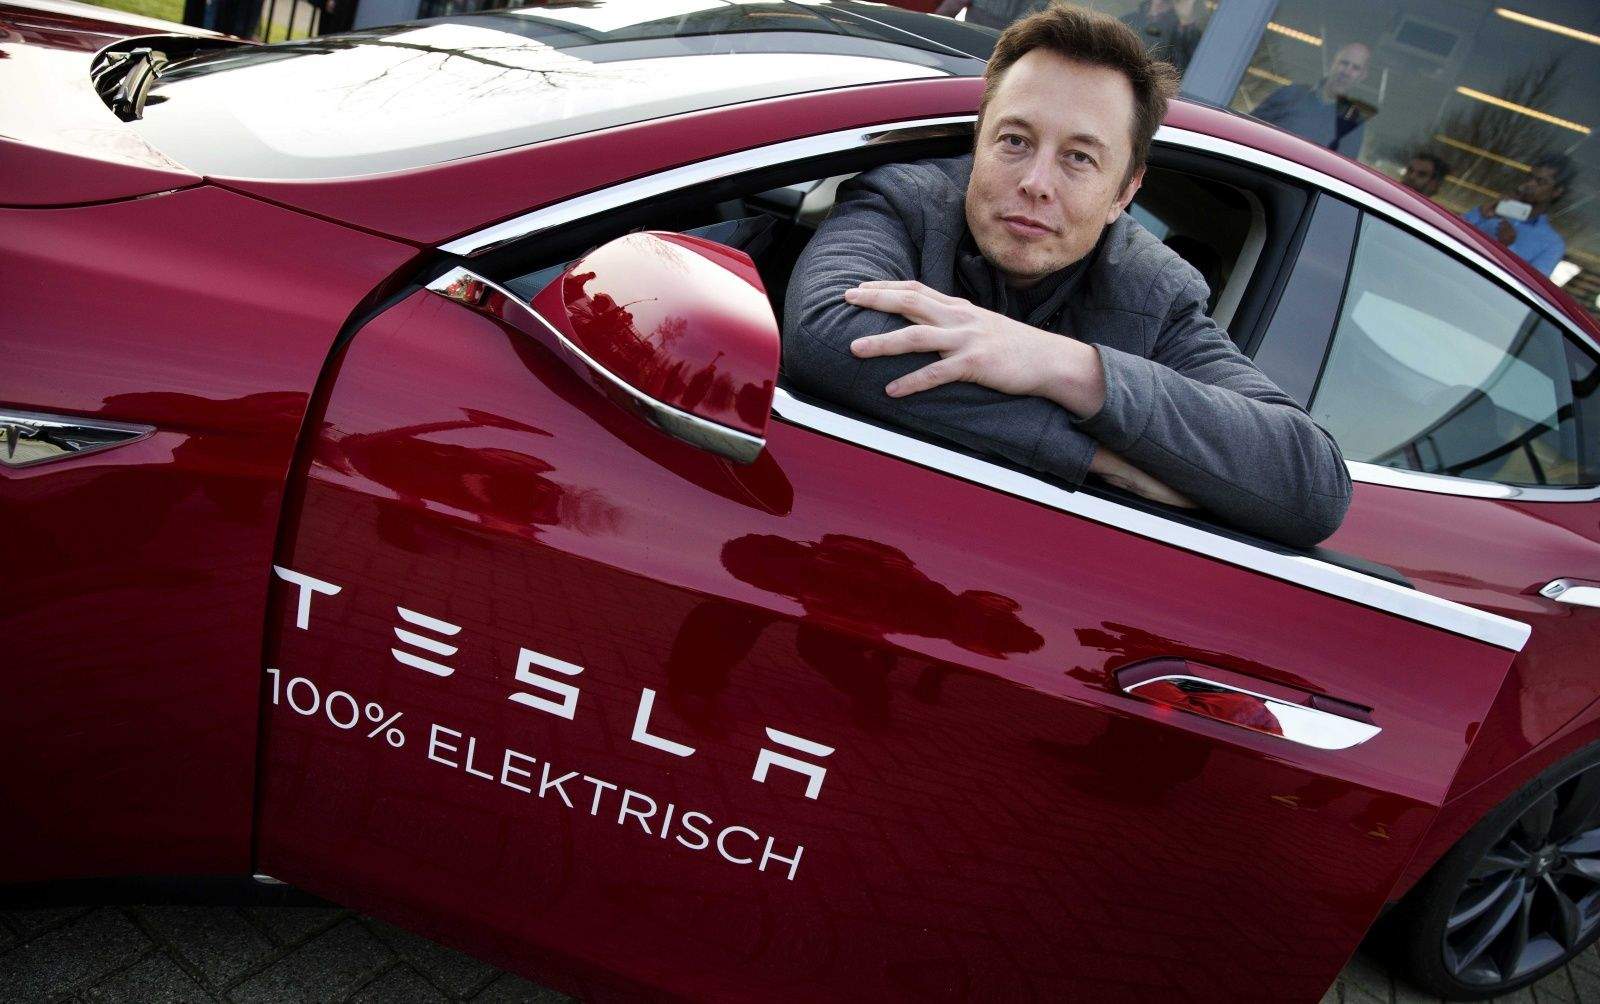 The billionaire founder of Tesla, Elon Musk, has been aggressively poaching Apple engineers.